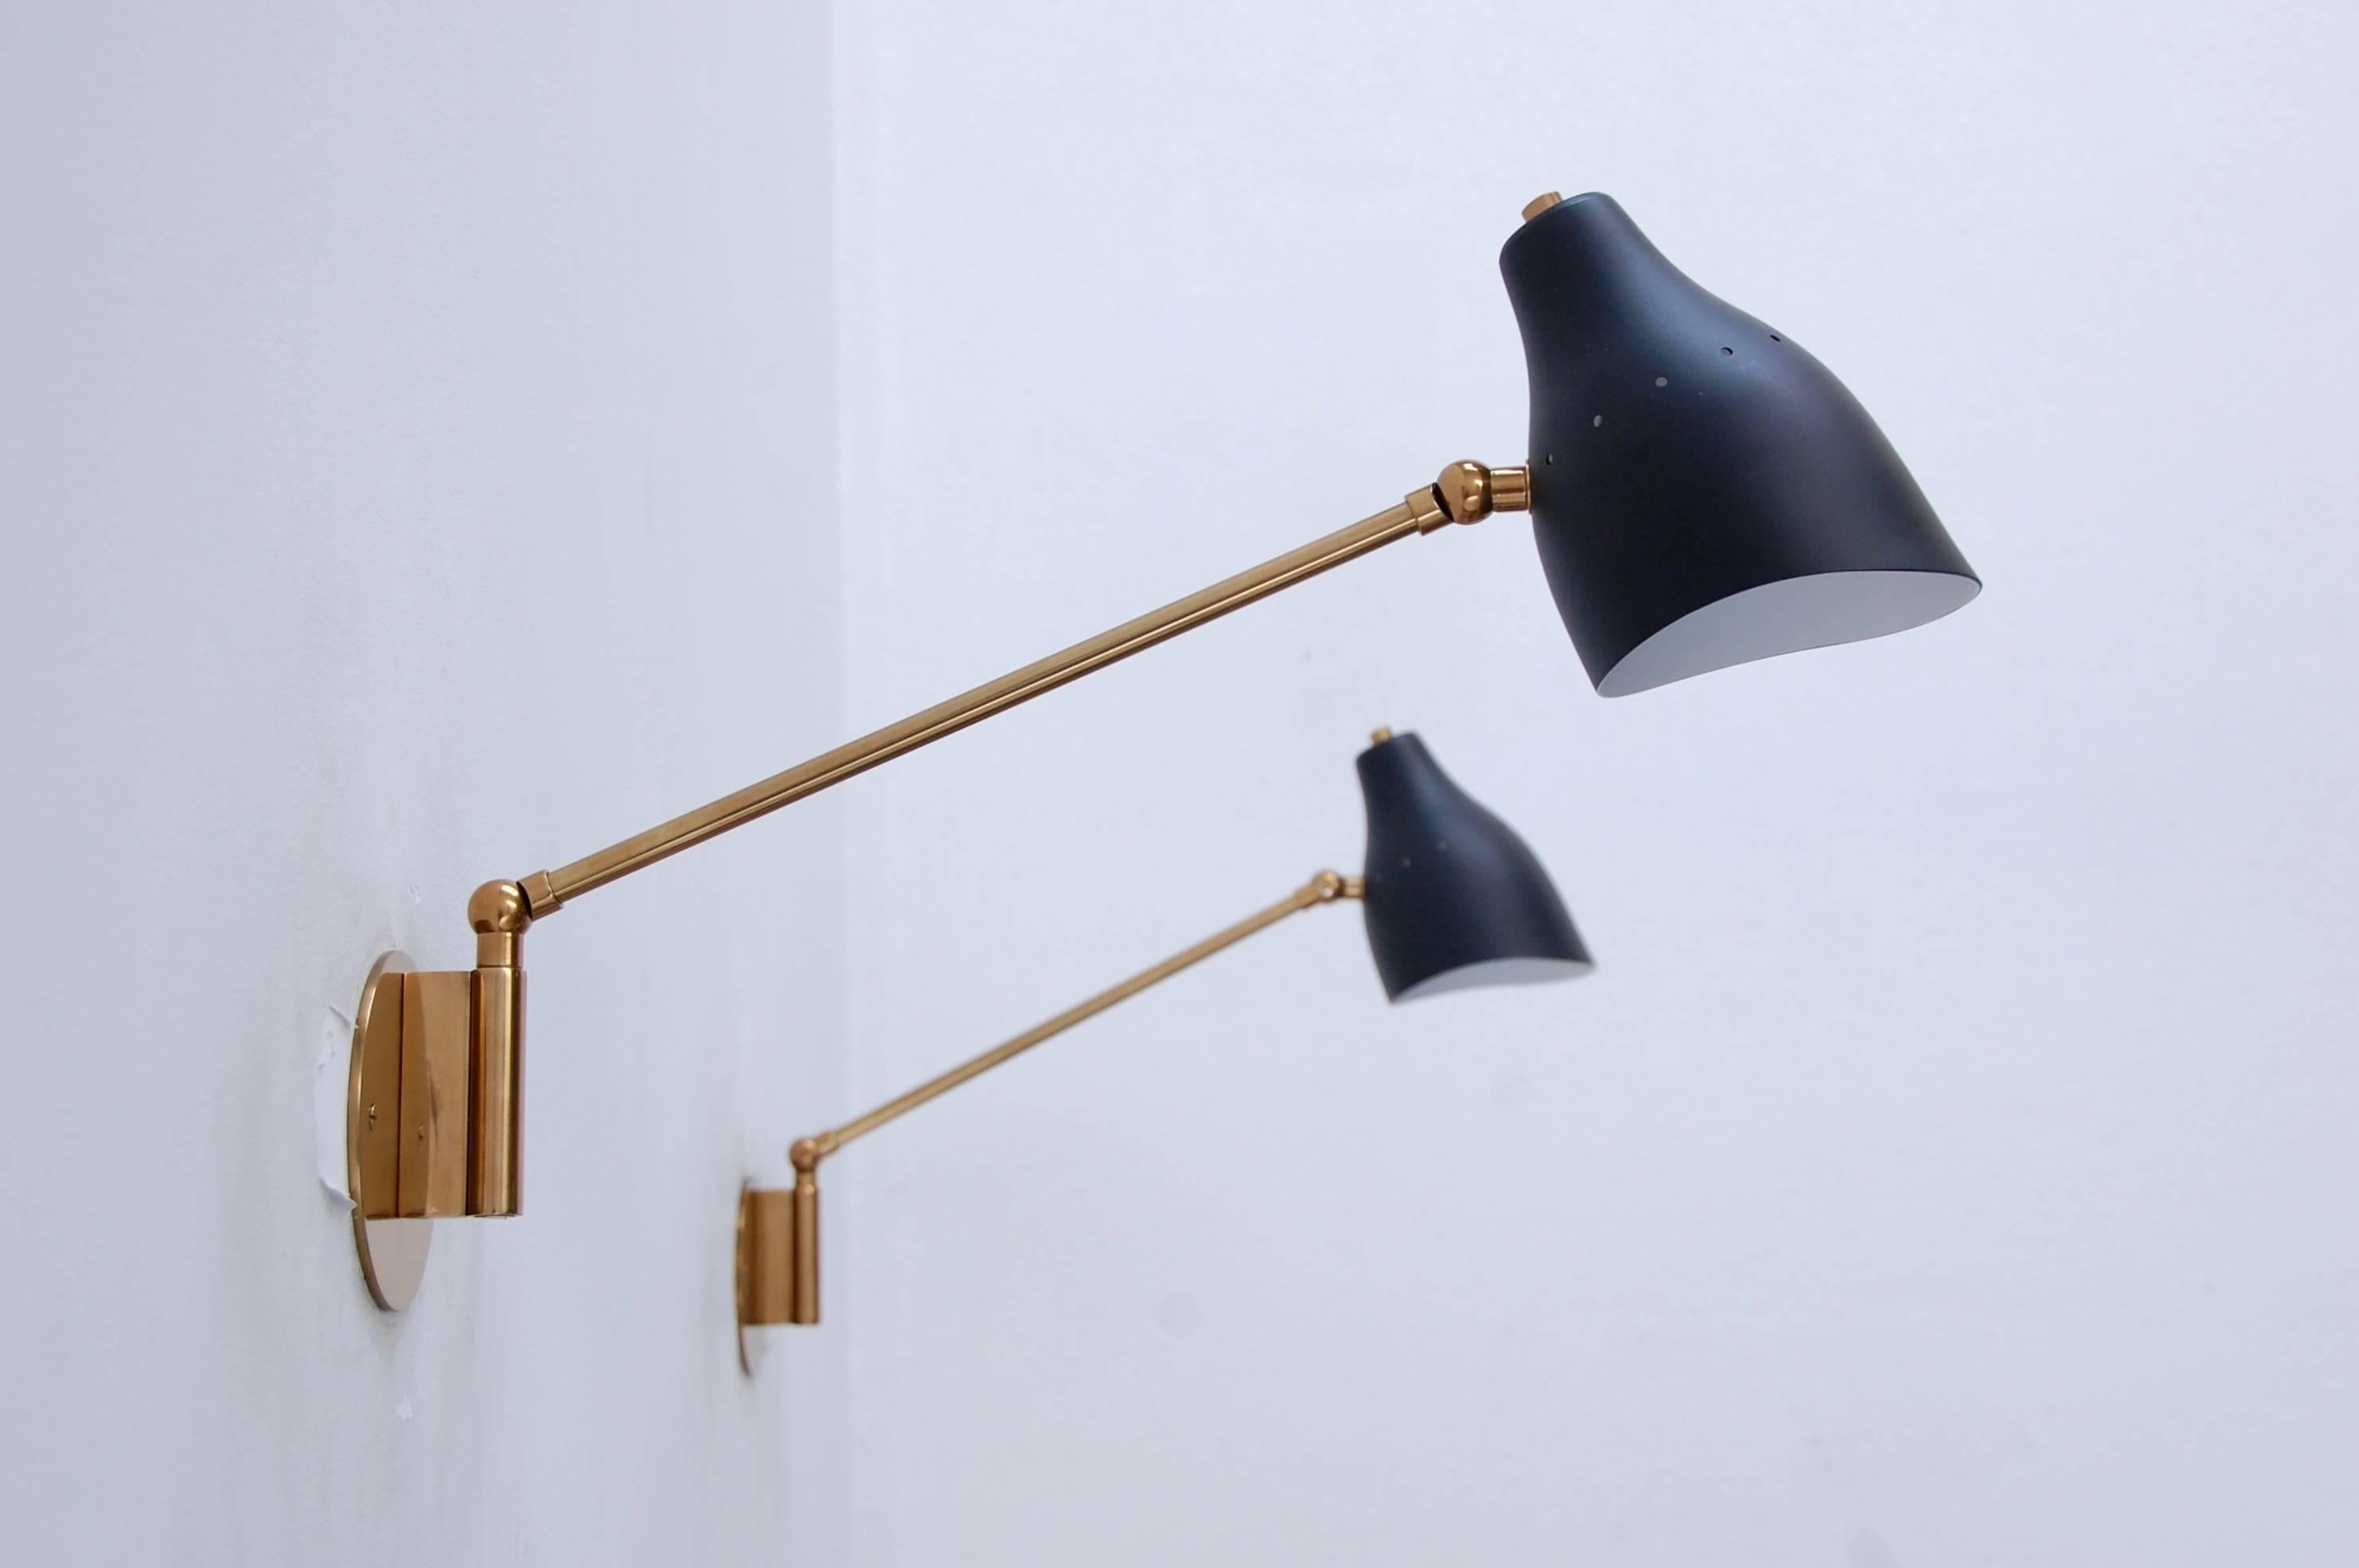 A foldable and swing version of our original Lumfardo Luminaires LUread Sconces with a foldable and swingable articulated arm to allow for more variance in light direction. Made from solid brass and a hand painted black aluminum shade. Custom colors